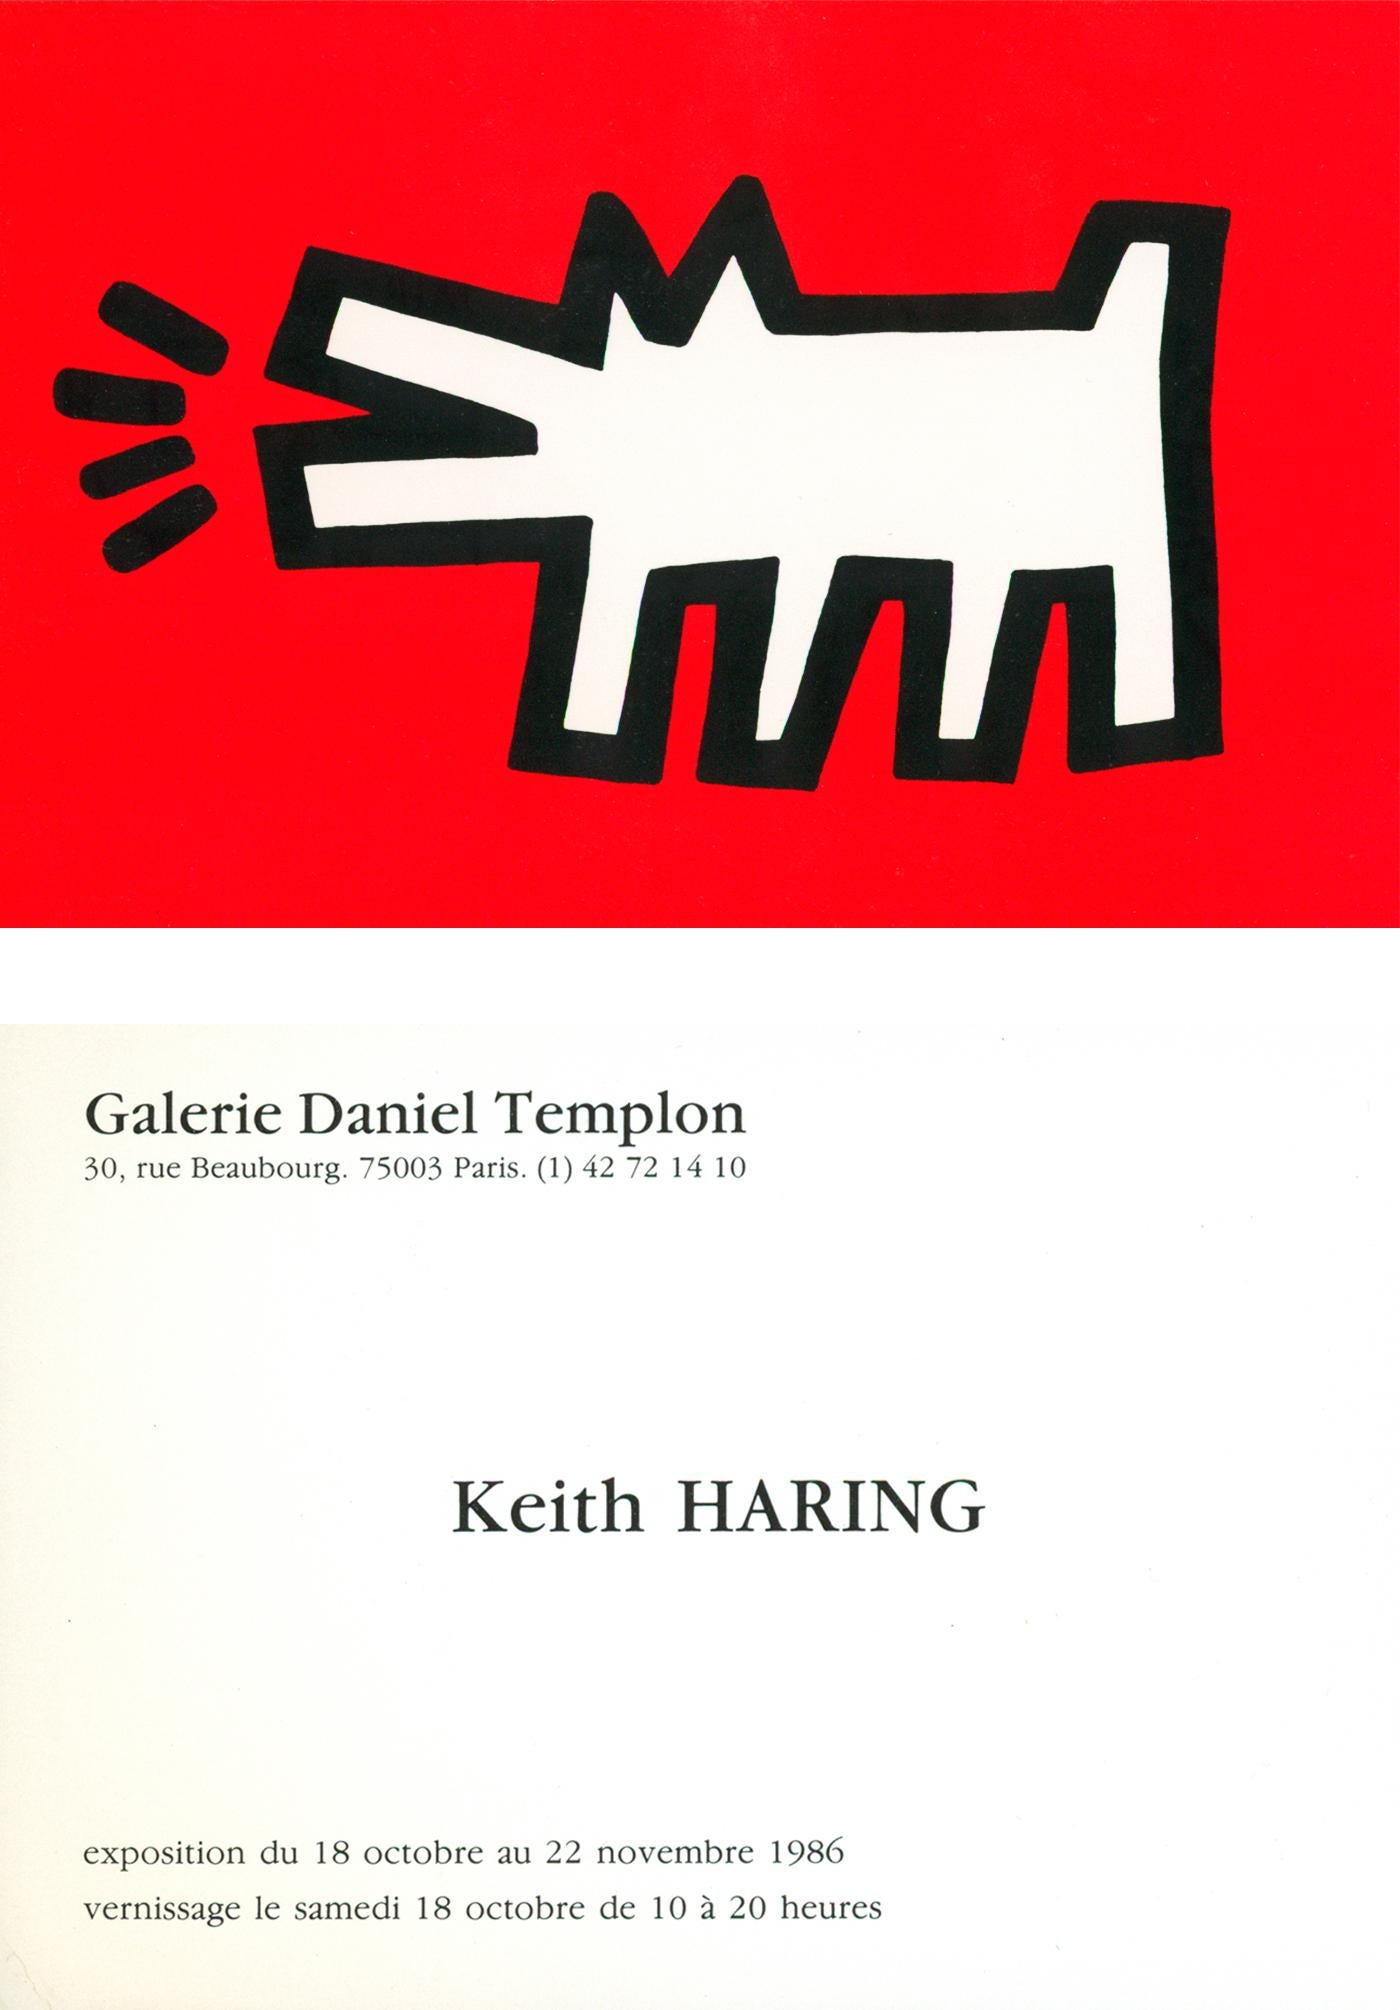 Keith Haring 1987-1996: set of 30 announcements (Keith Haring pop shop) For Sale 2